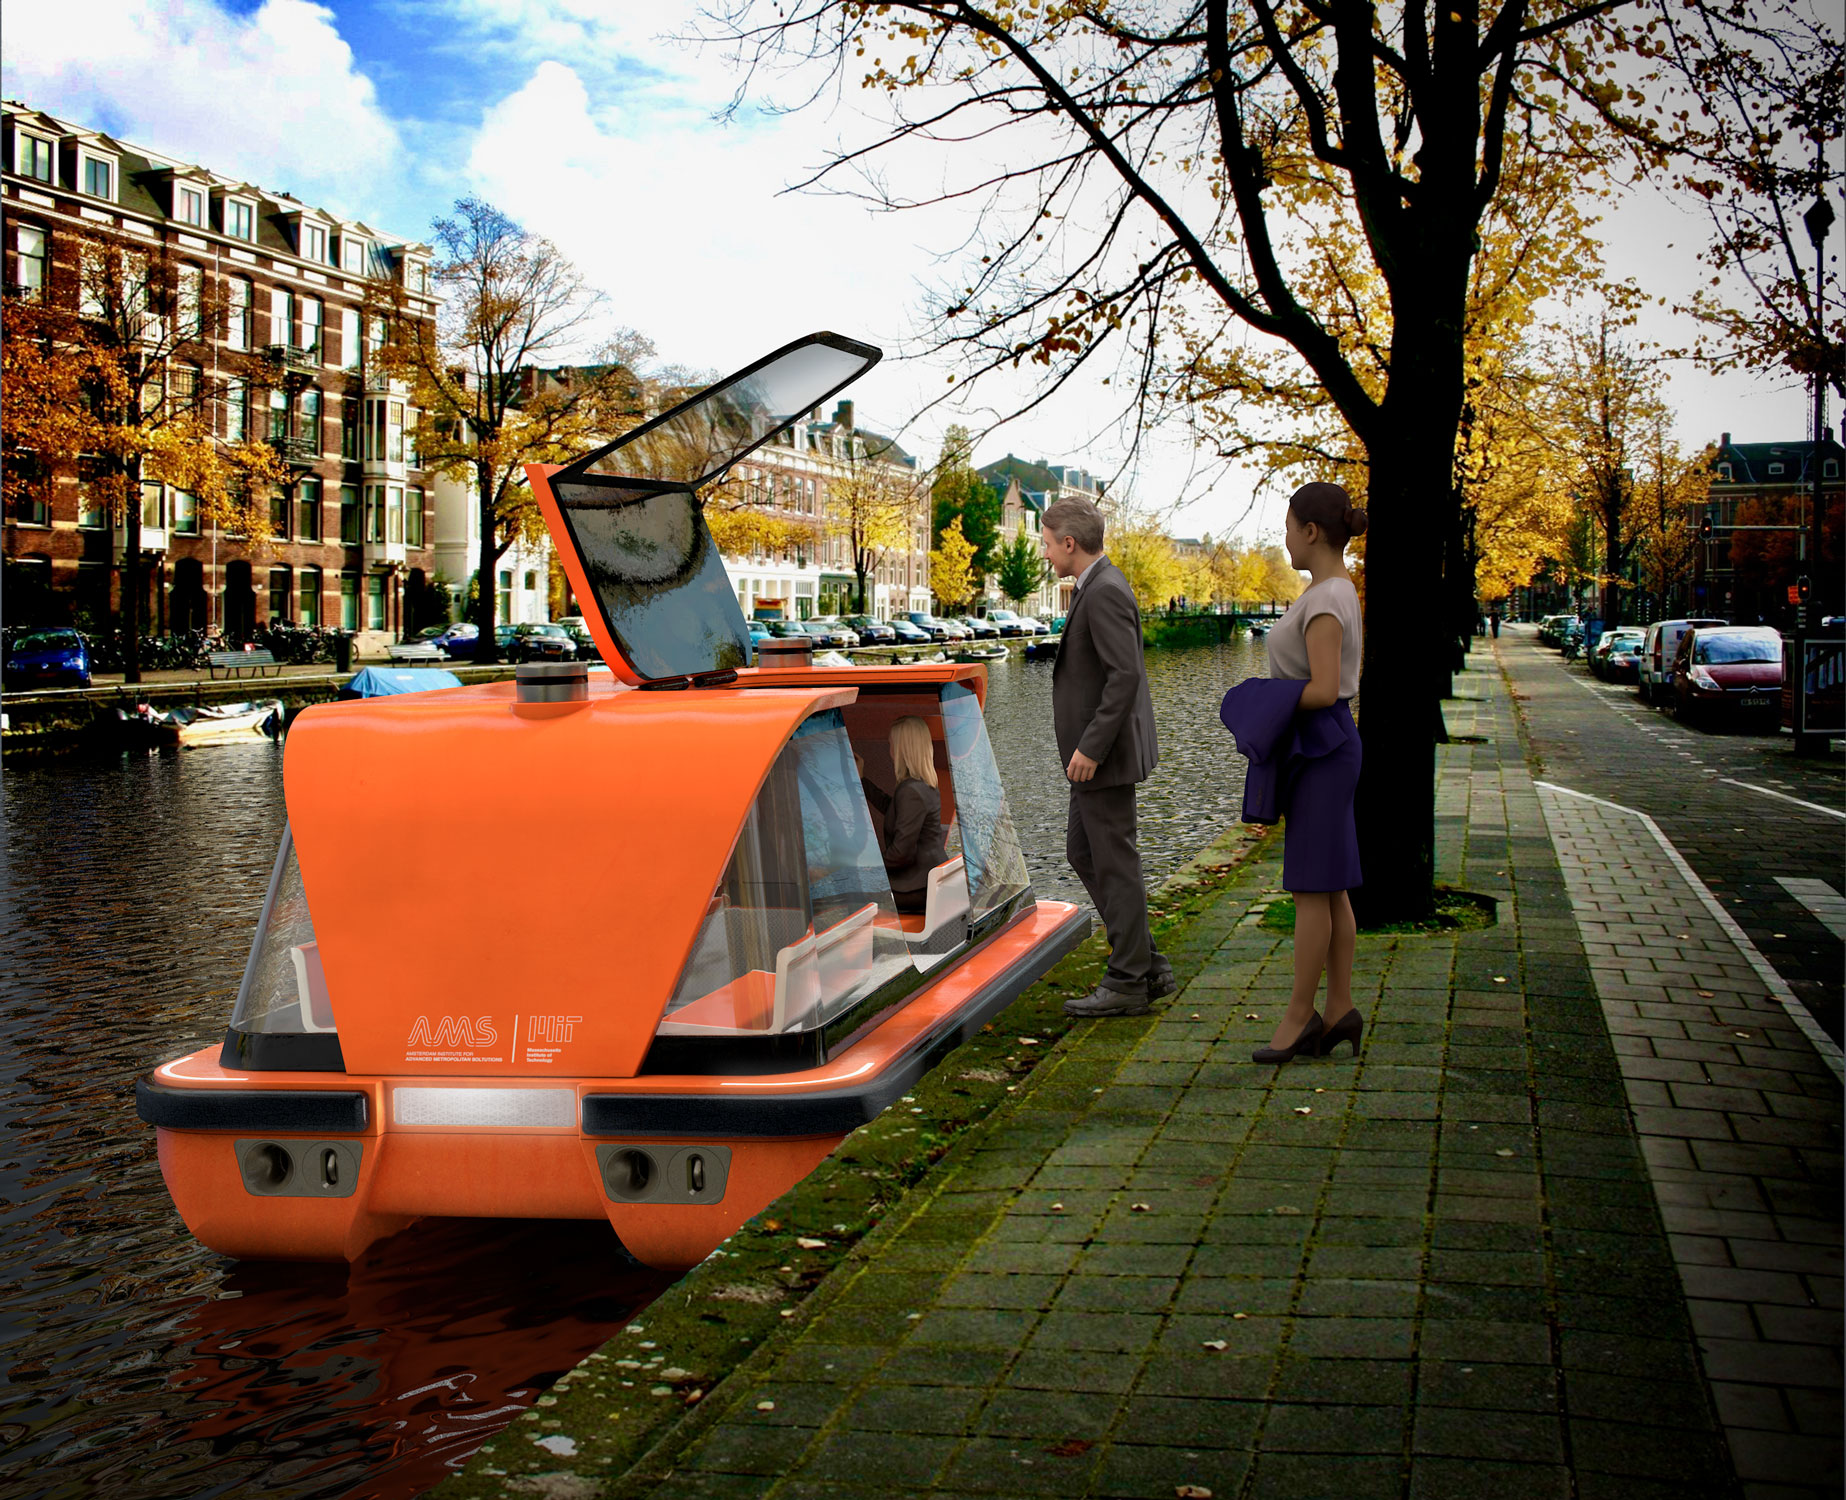 Rendering of a Roboat taxi picking up passengers along one of Amsterdam's many canals.